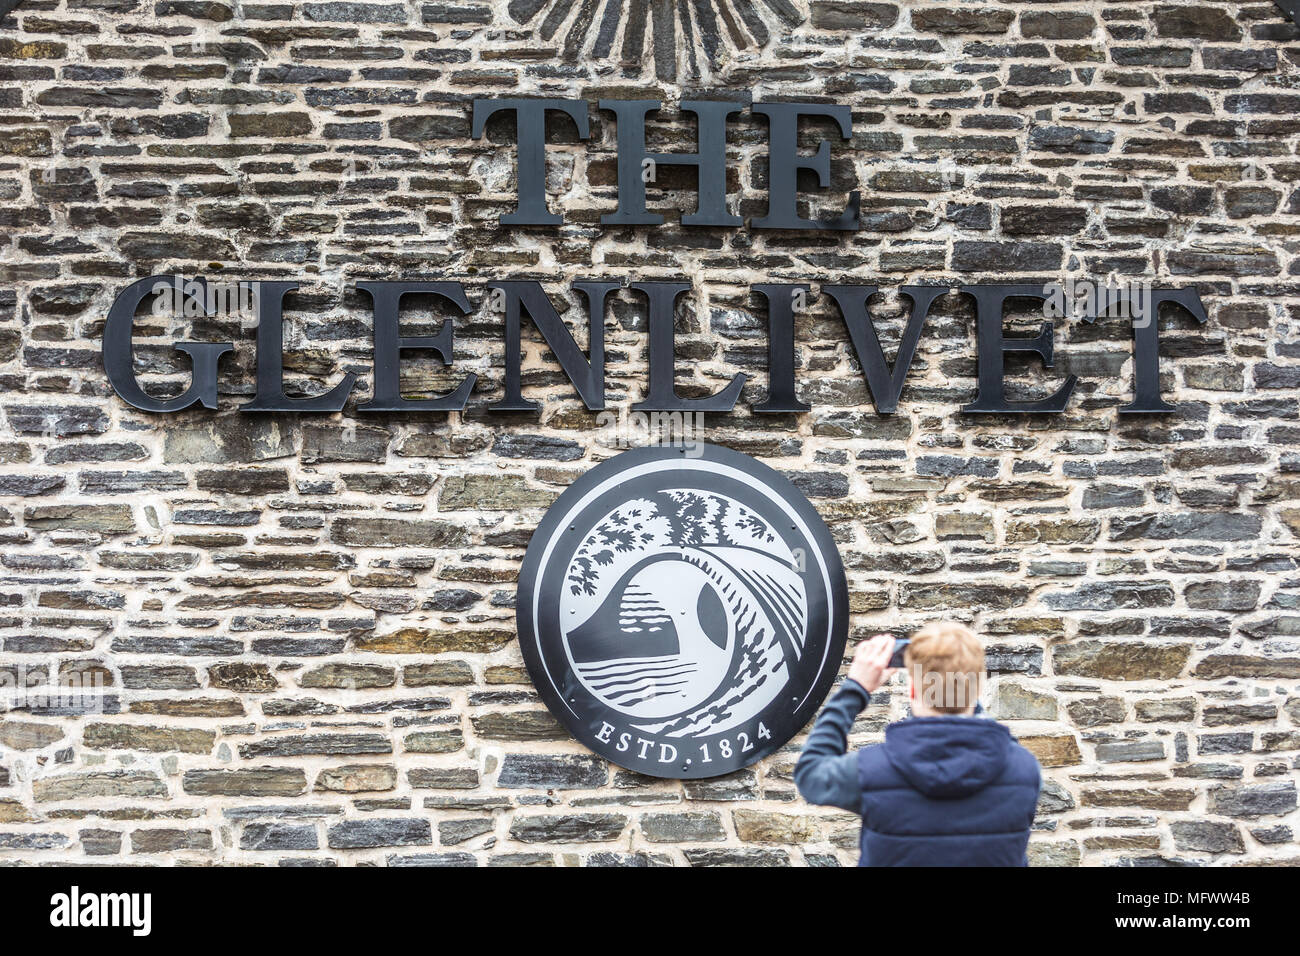 Aman visitor takes a mobilephone photograph outside the Glenlivet whisky distillery Scotland UK Stock Photo